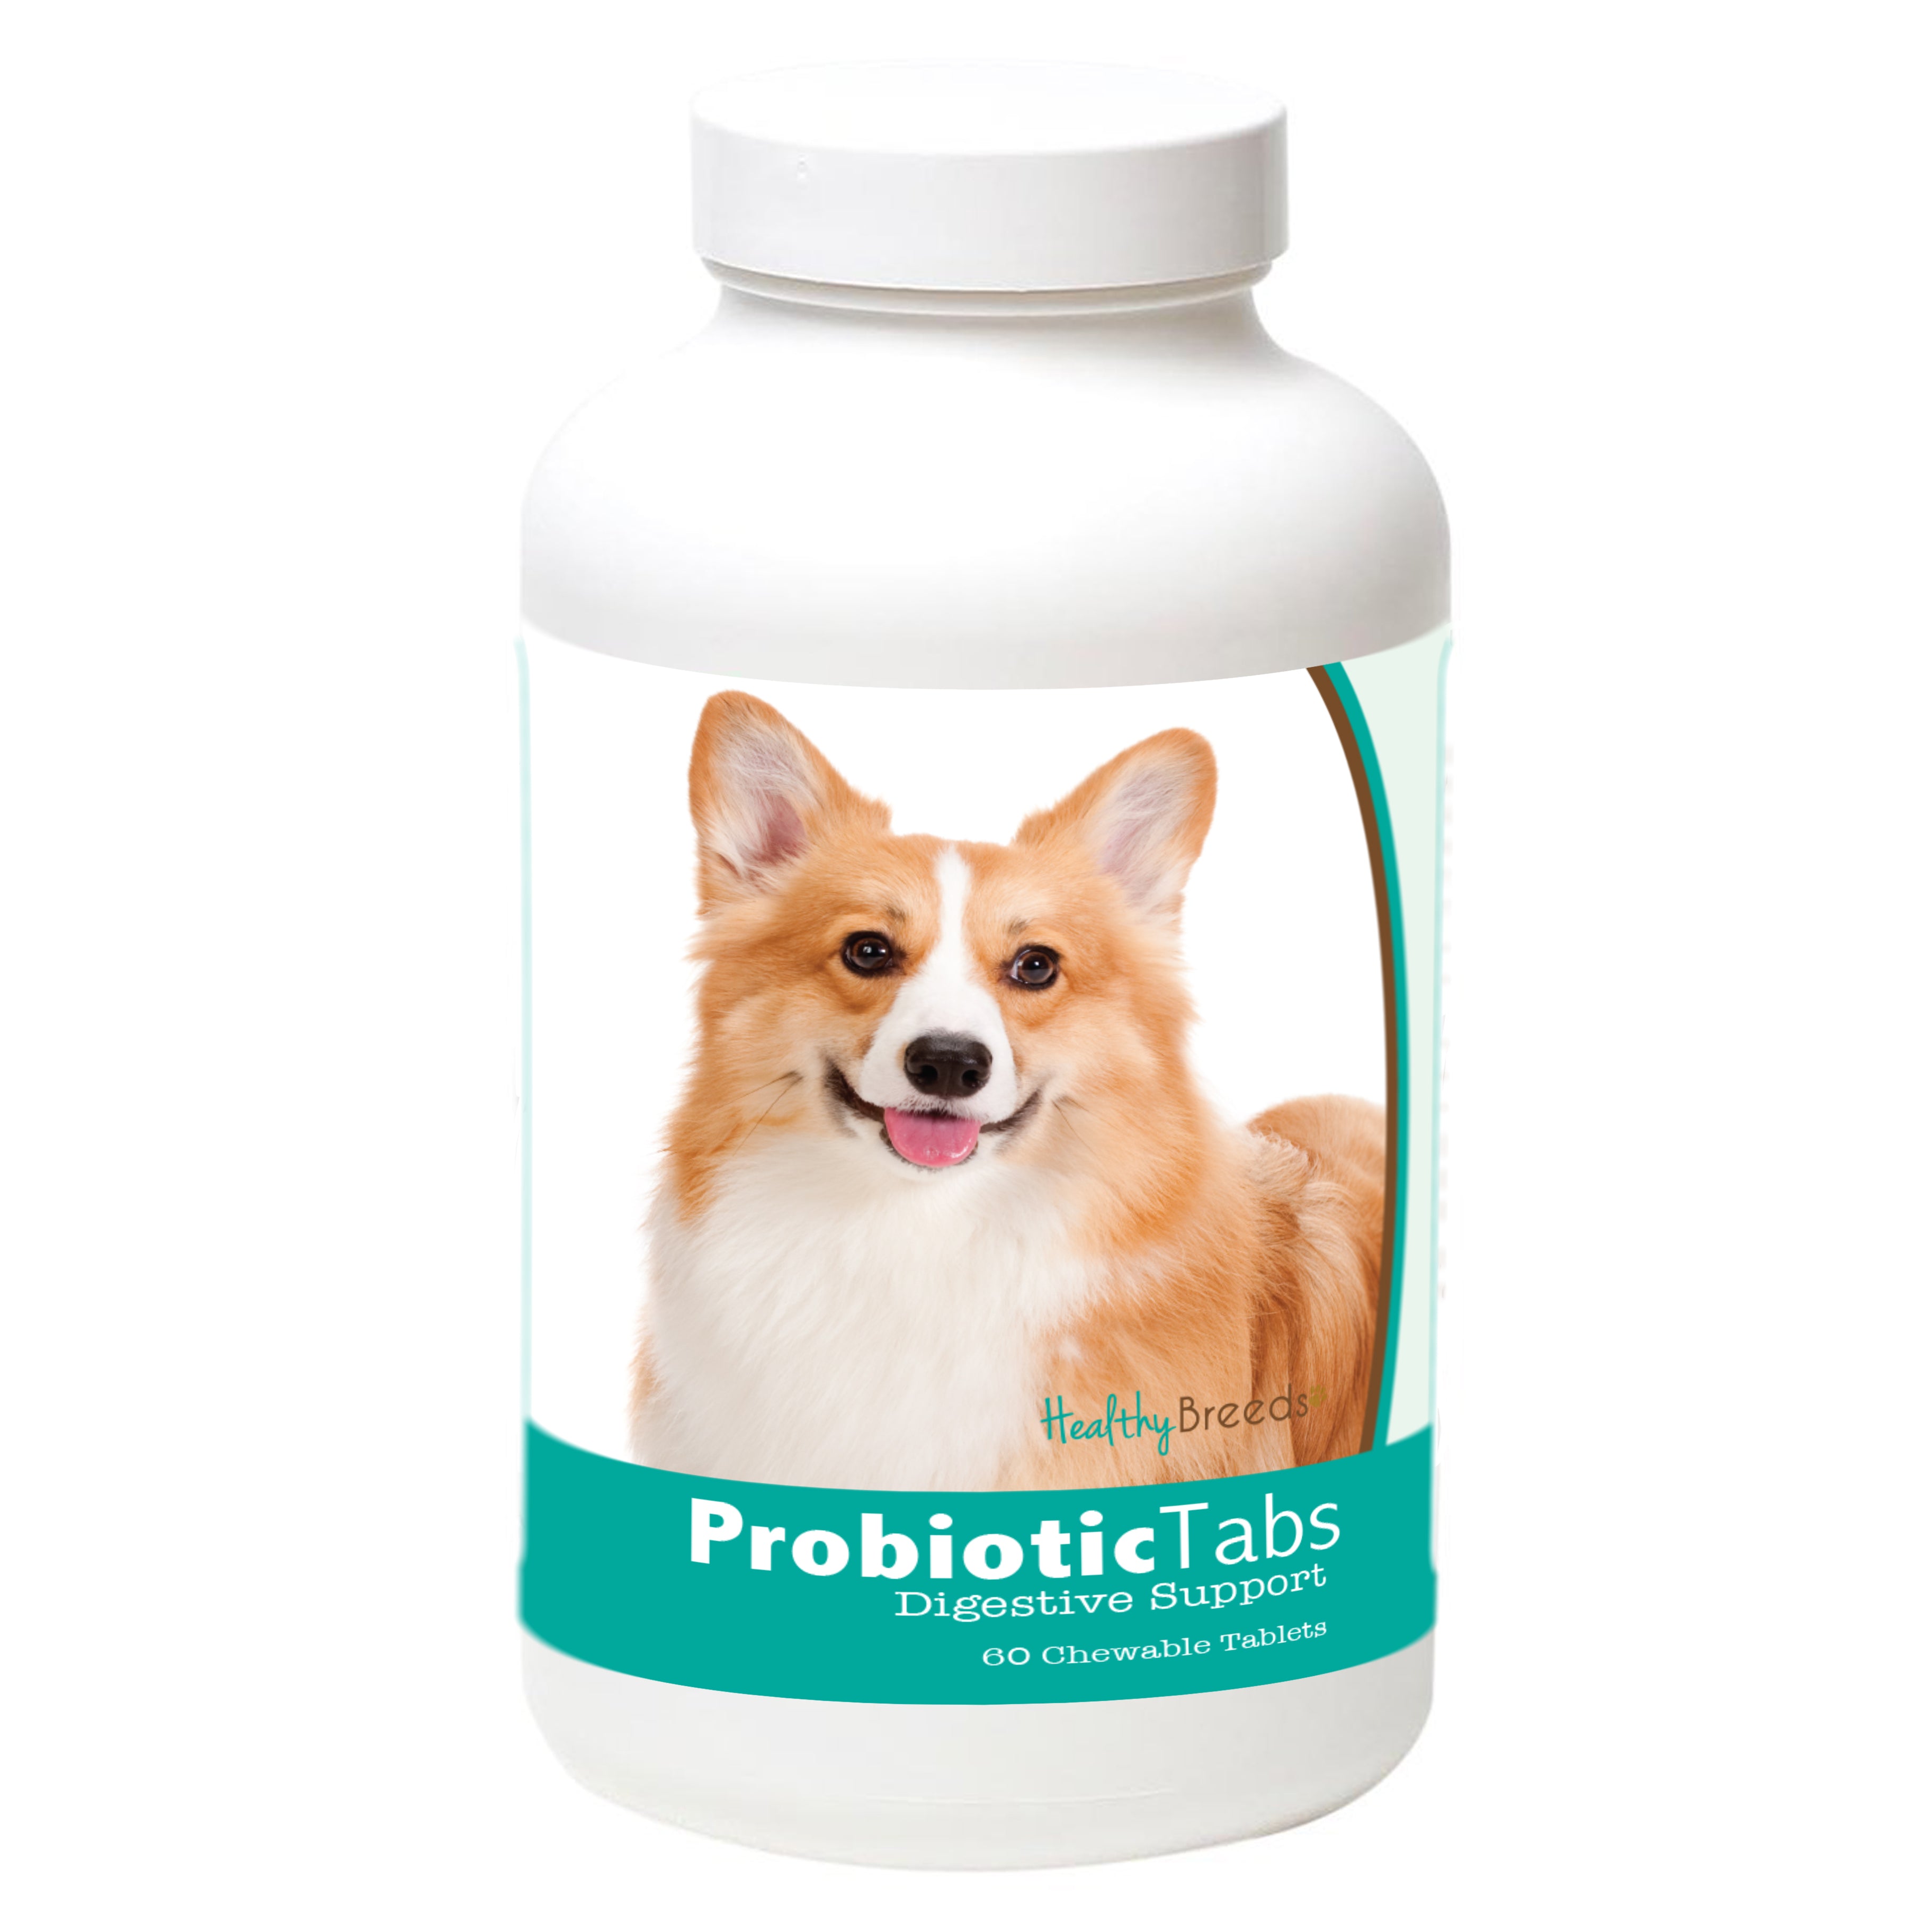 Pembroke Welsh Corgi Probiotic and Digestive Support for Dogs 60 Count